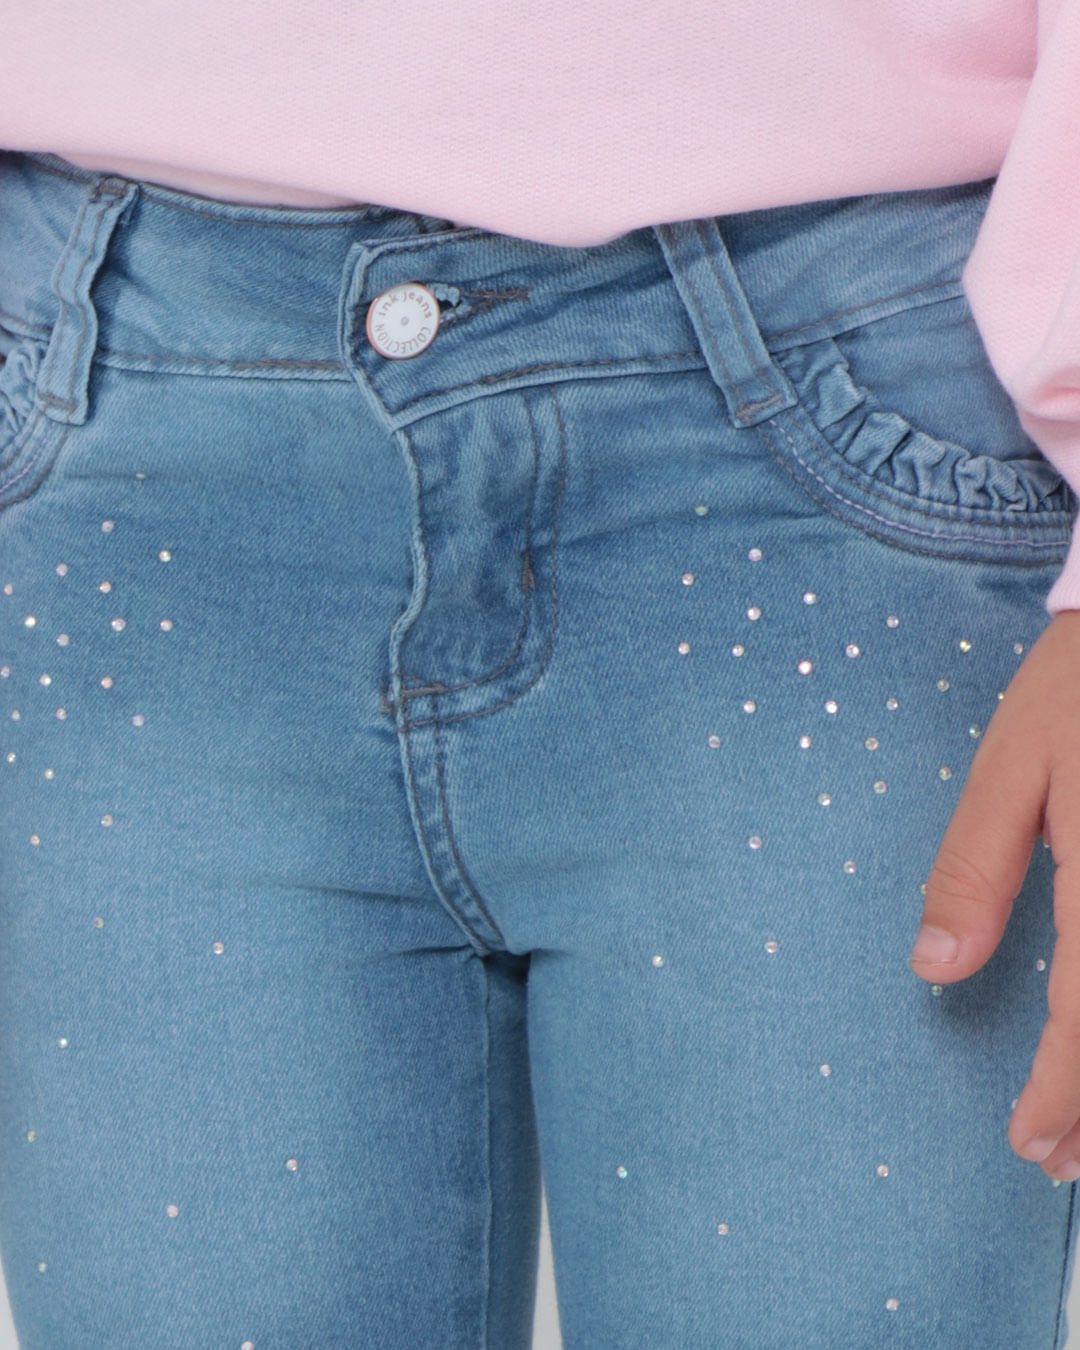 Calca-Jeans-3562-Strass-F-Lc--48---Blue-Jeans-Claro